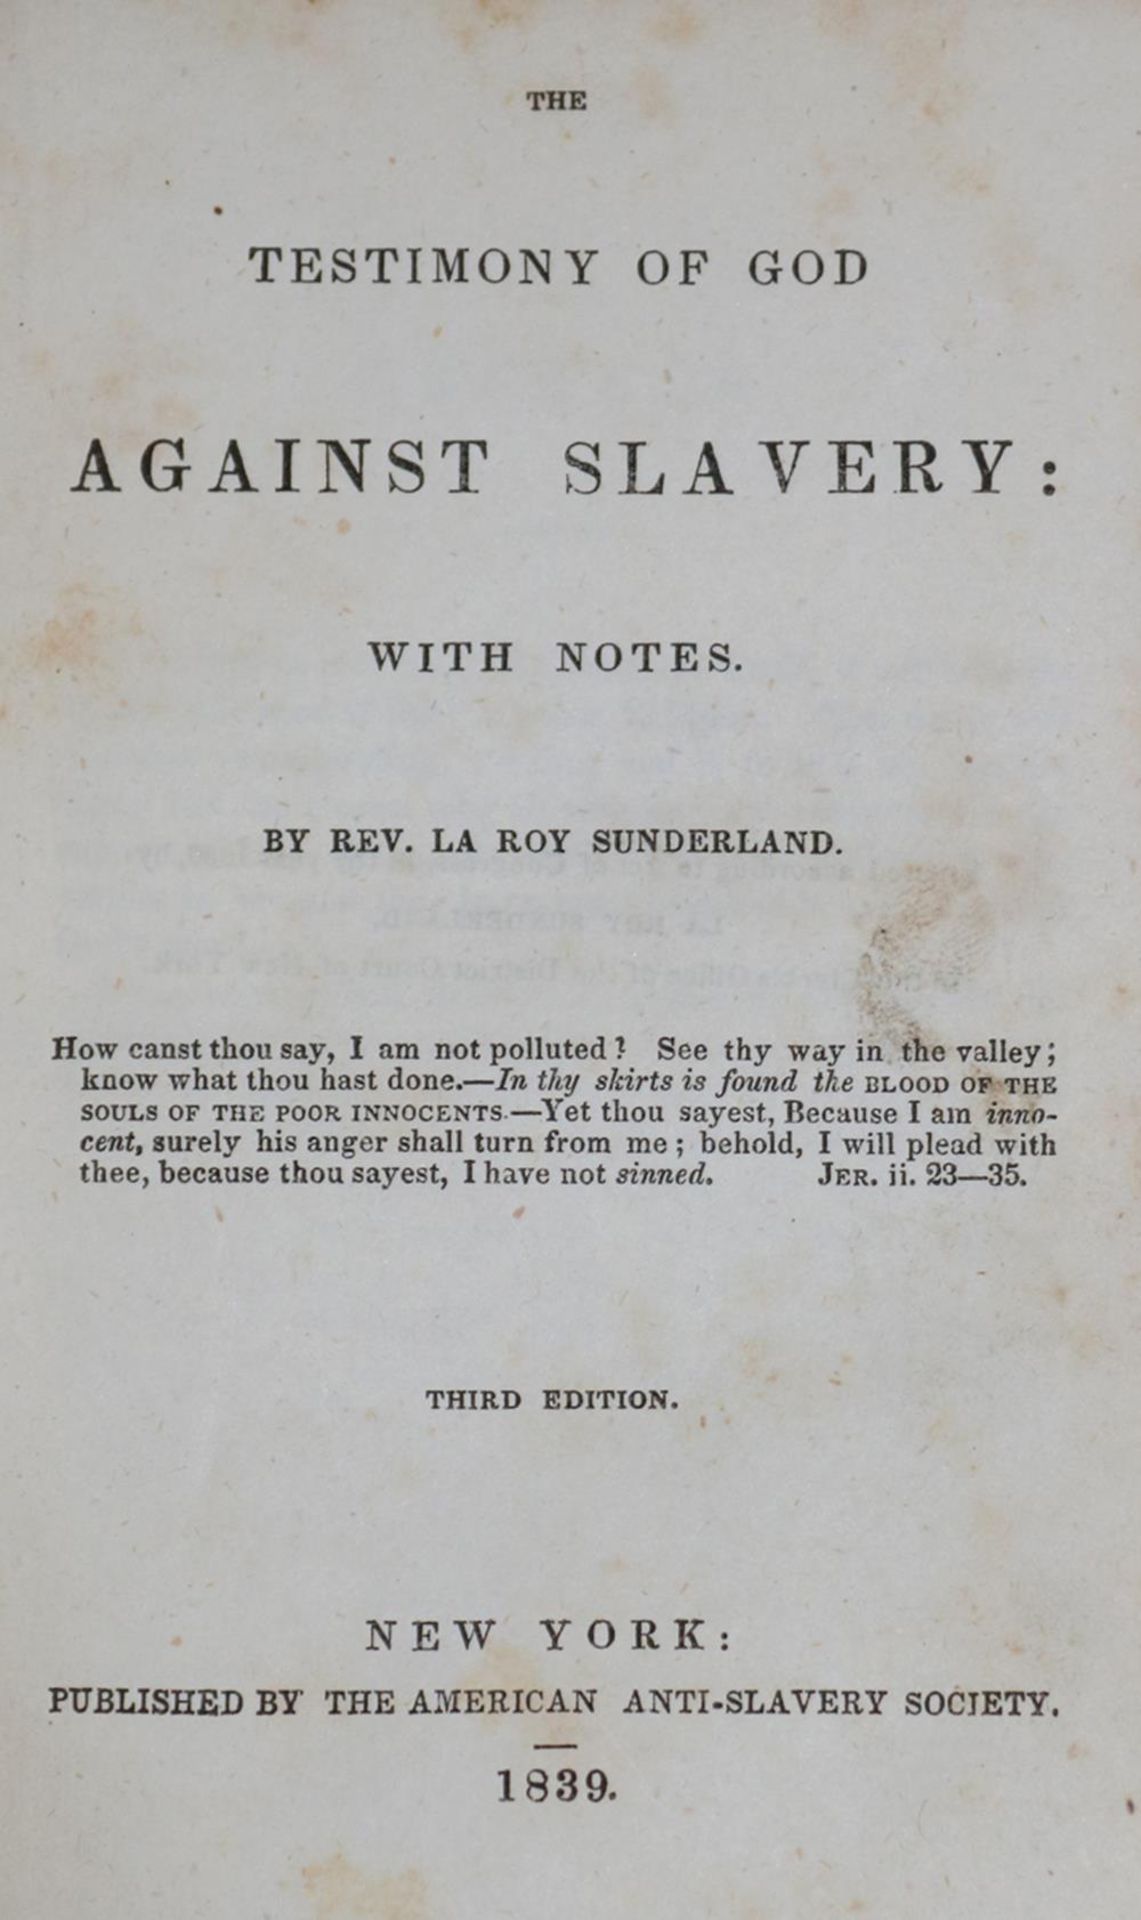 Sunderland,L.The Testimony of God against Slavery, with notes. 3. ed. New York, American Anti-